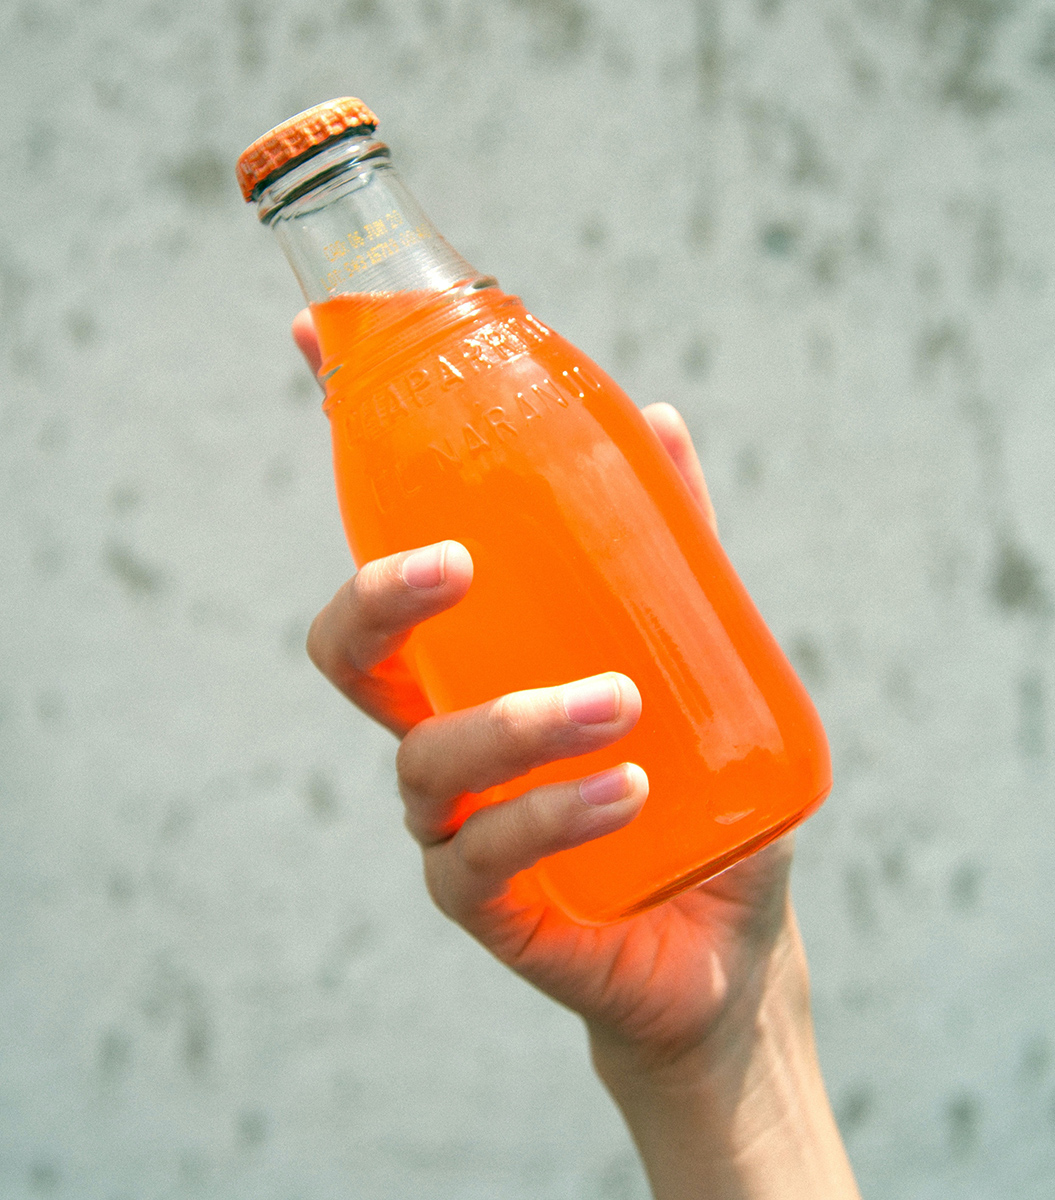 A woman's hand holding a bottle of orange-flavored soda